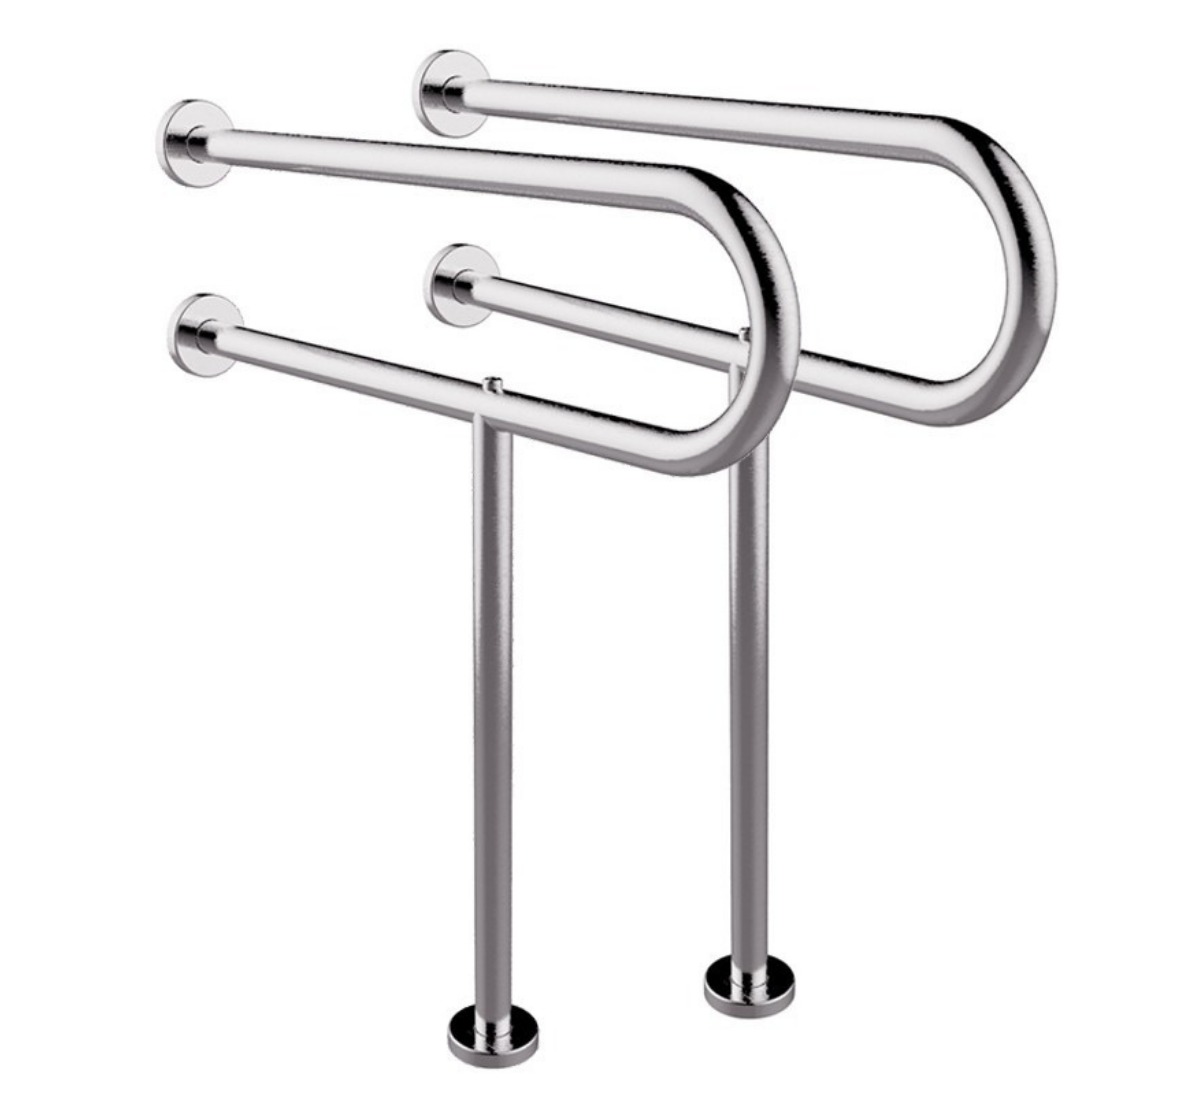 Stainless Steel U Shaped Disabled Grab Bar (Set Of 2)
